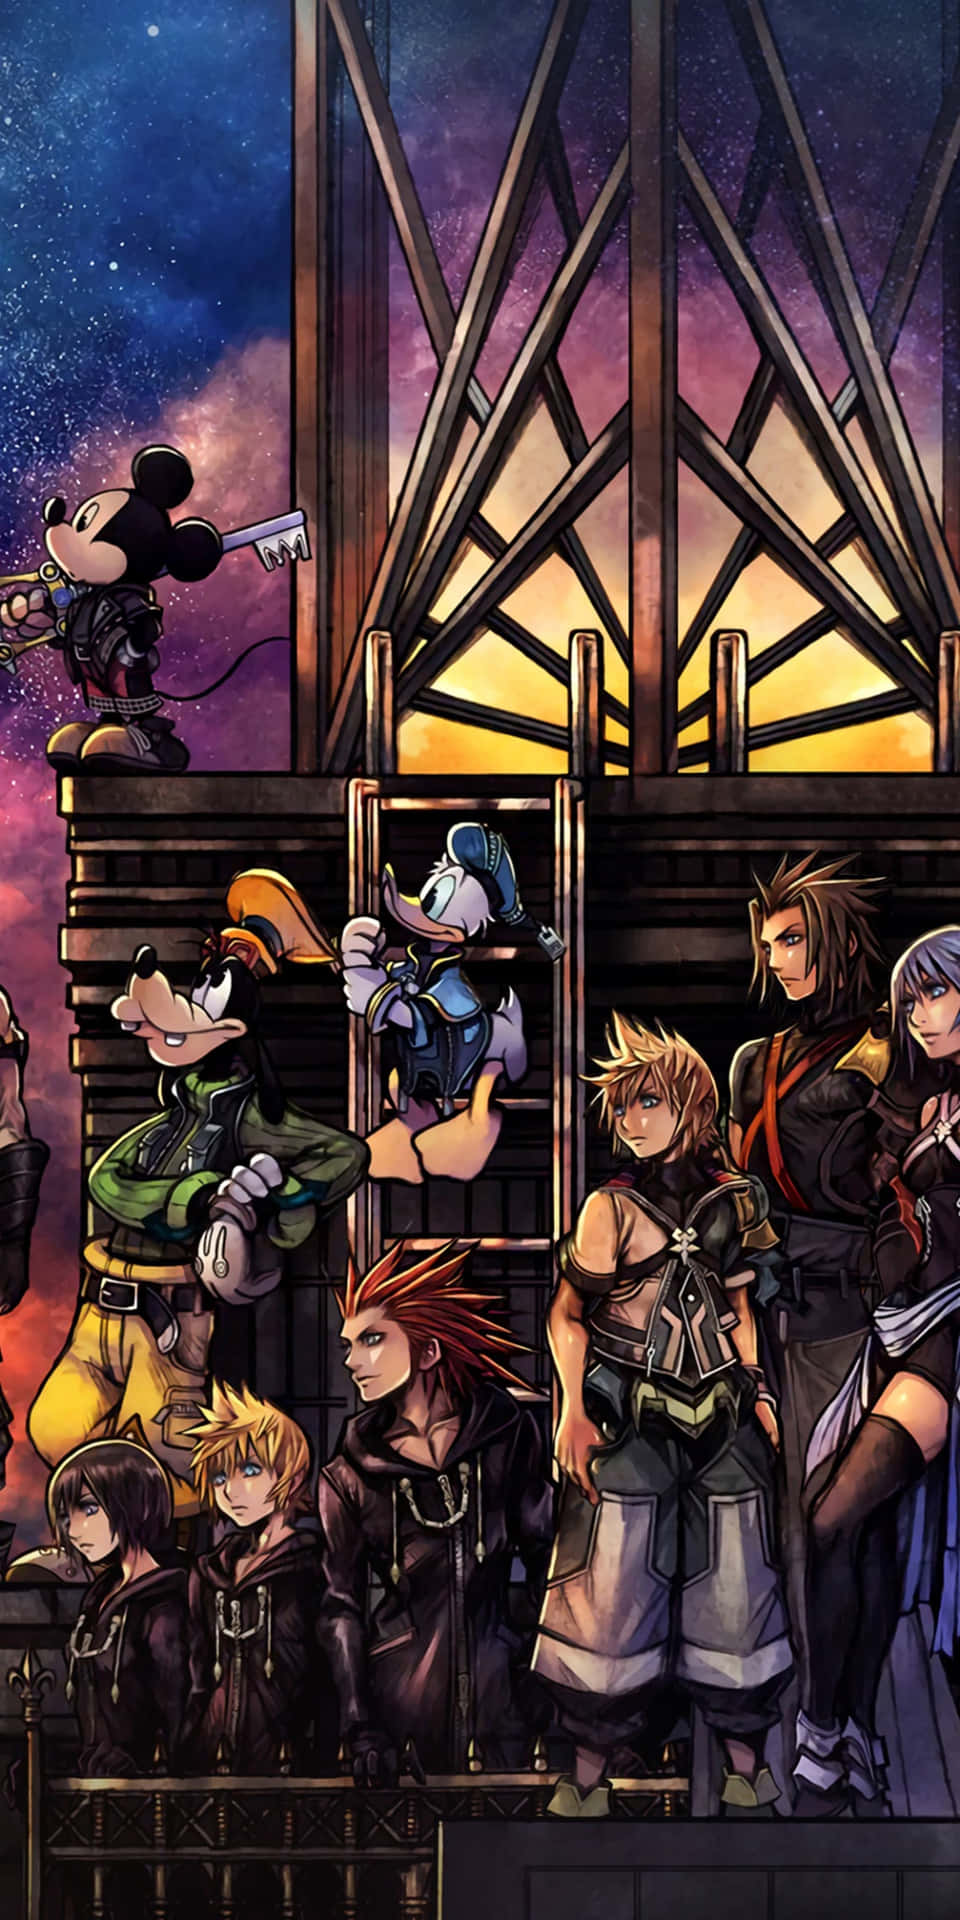 Unlock the adventure with the Kingdom Hearts Phone Wallpaper